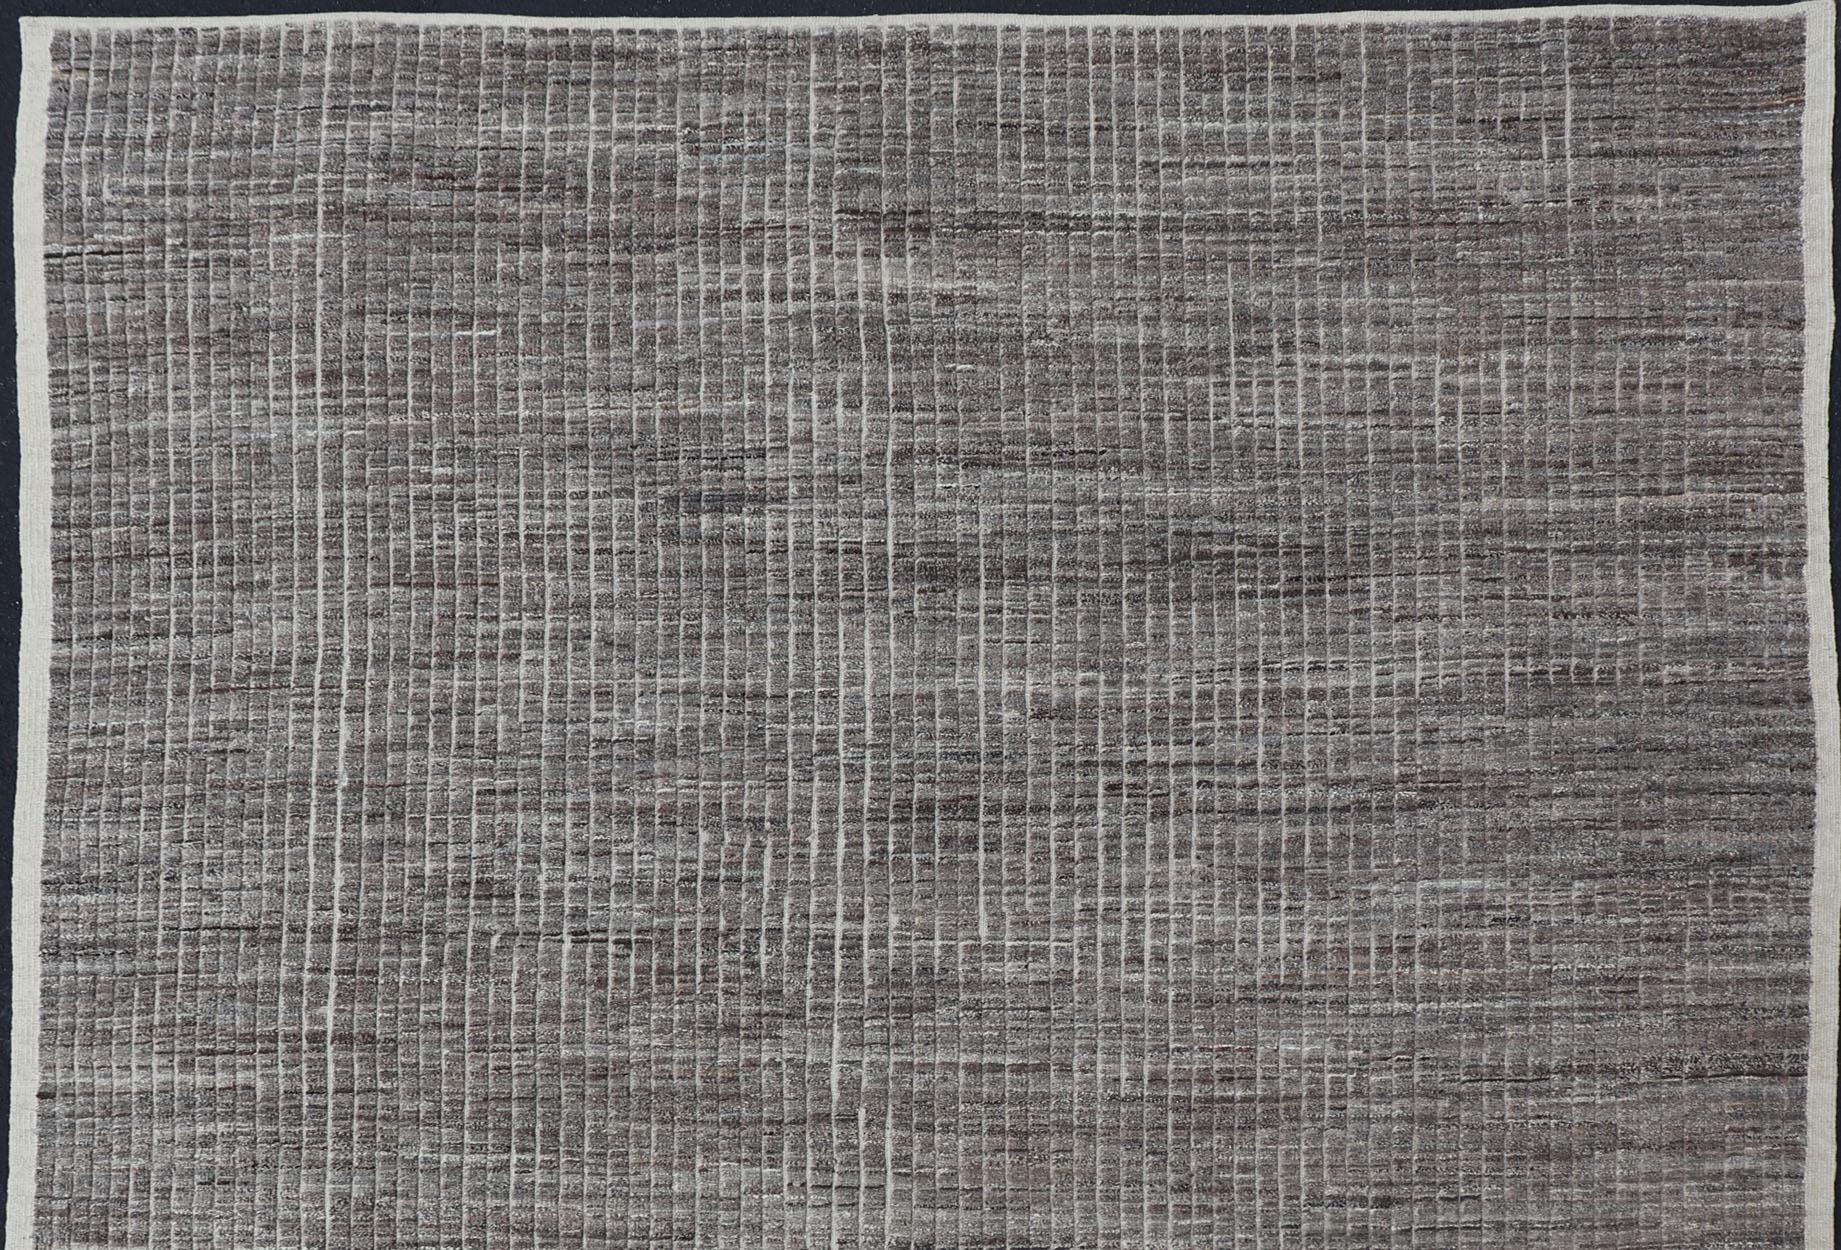 Dark Gray Casual Modern Rug by Keivan Woven Arts with High and Low Textured Pile. Keivan Woven Arts / rug AFG-36093, country of origin / type: Afghanistan / modern rug with pile, condition: new
Measures: 8'8 x 11'10.
This brand new rug features a